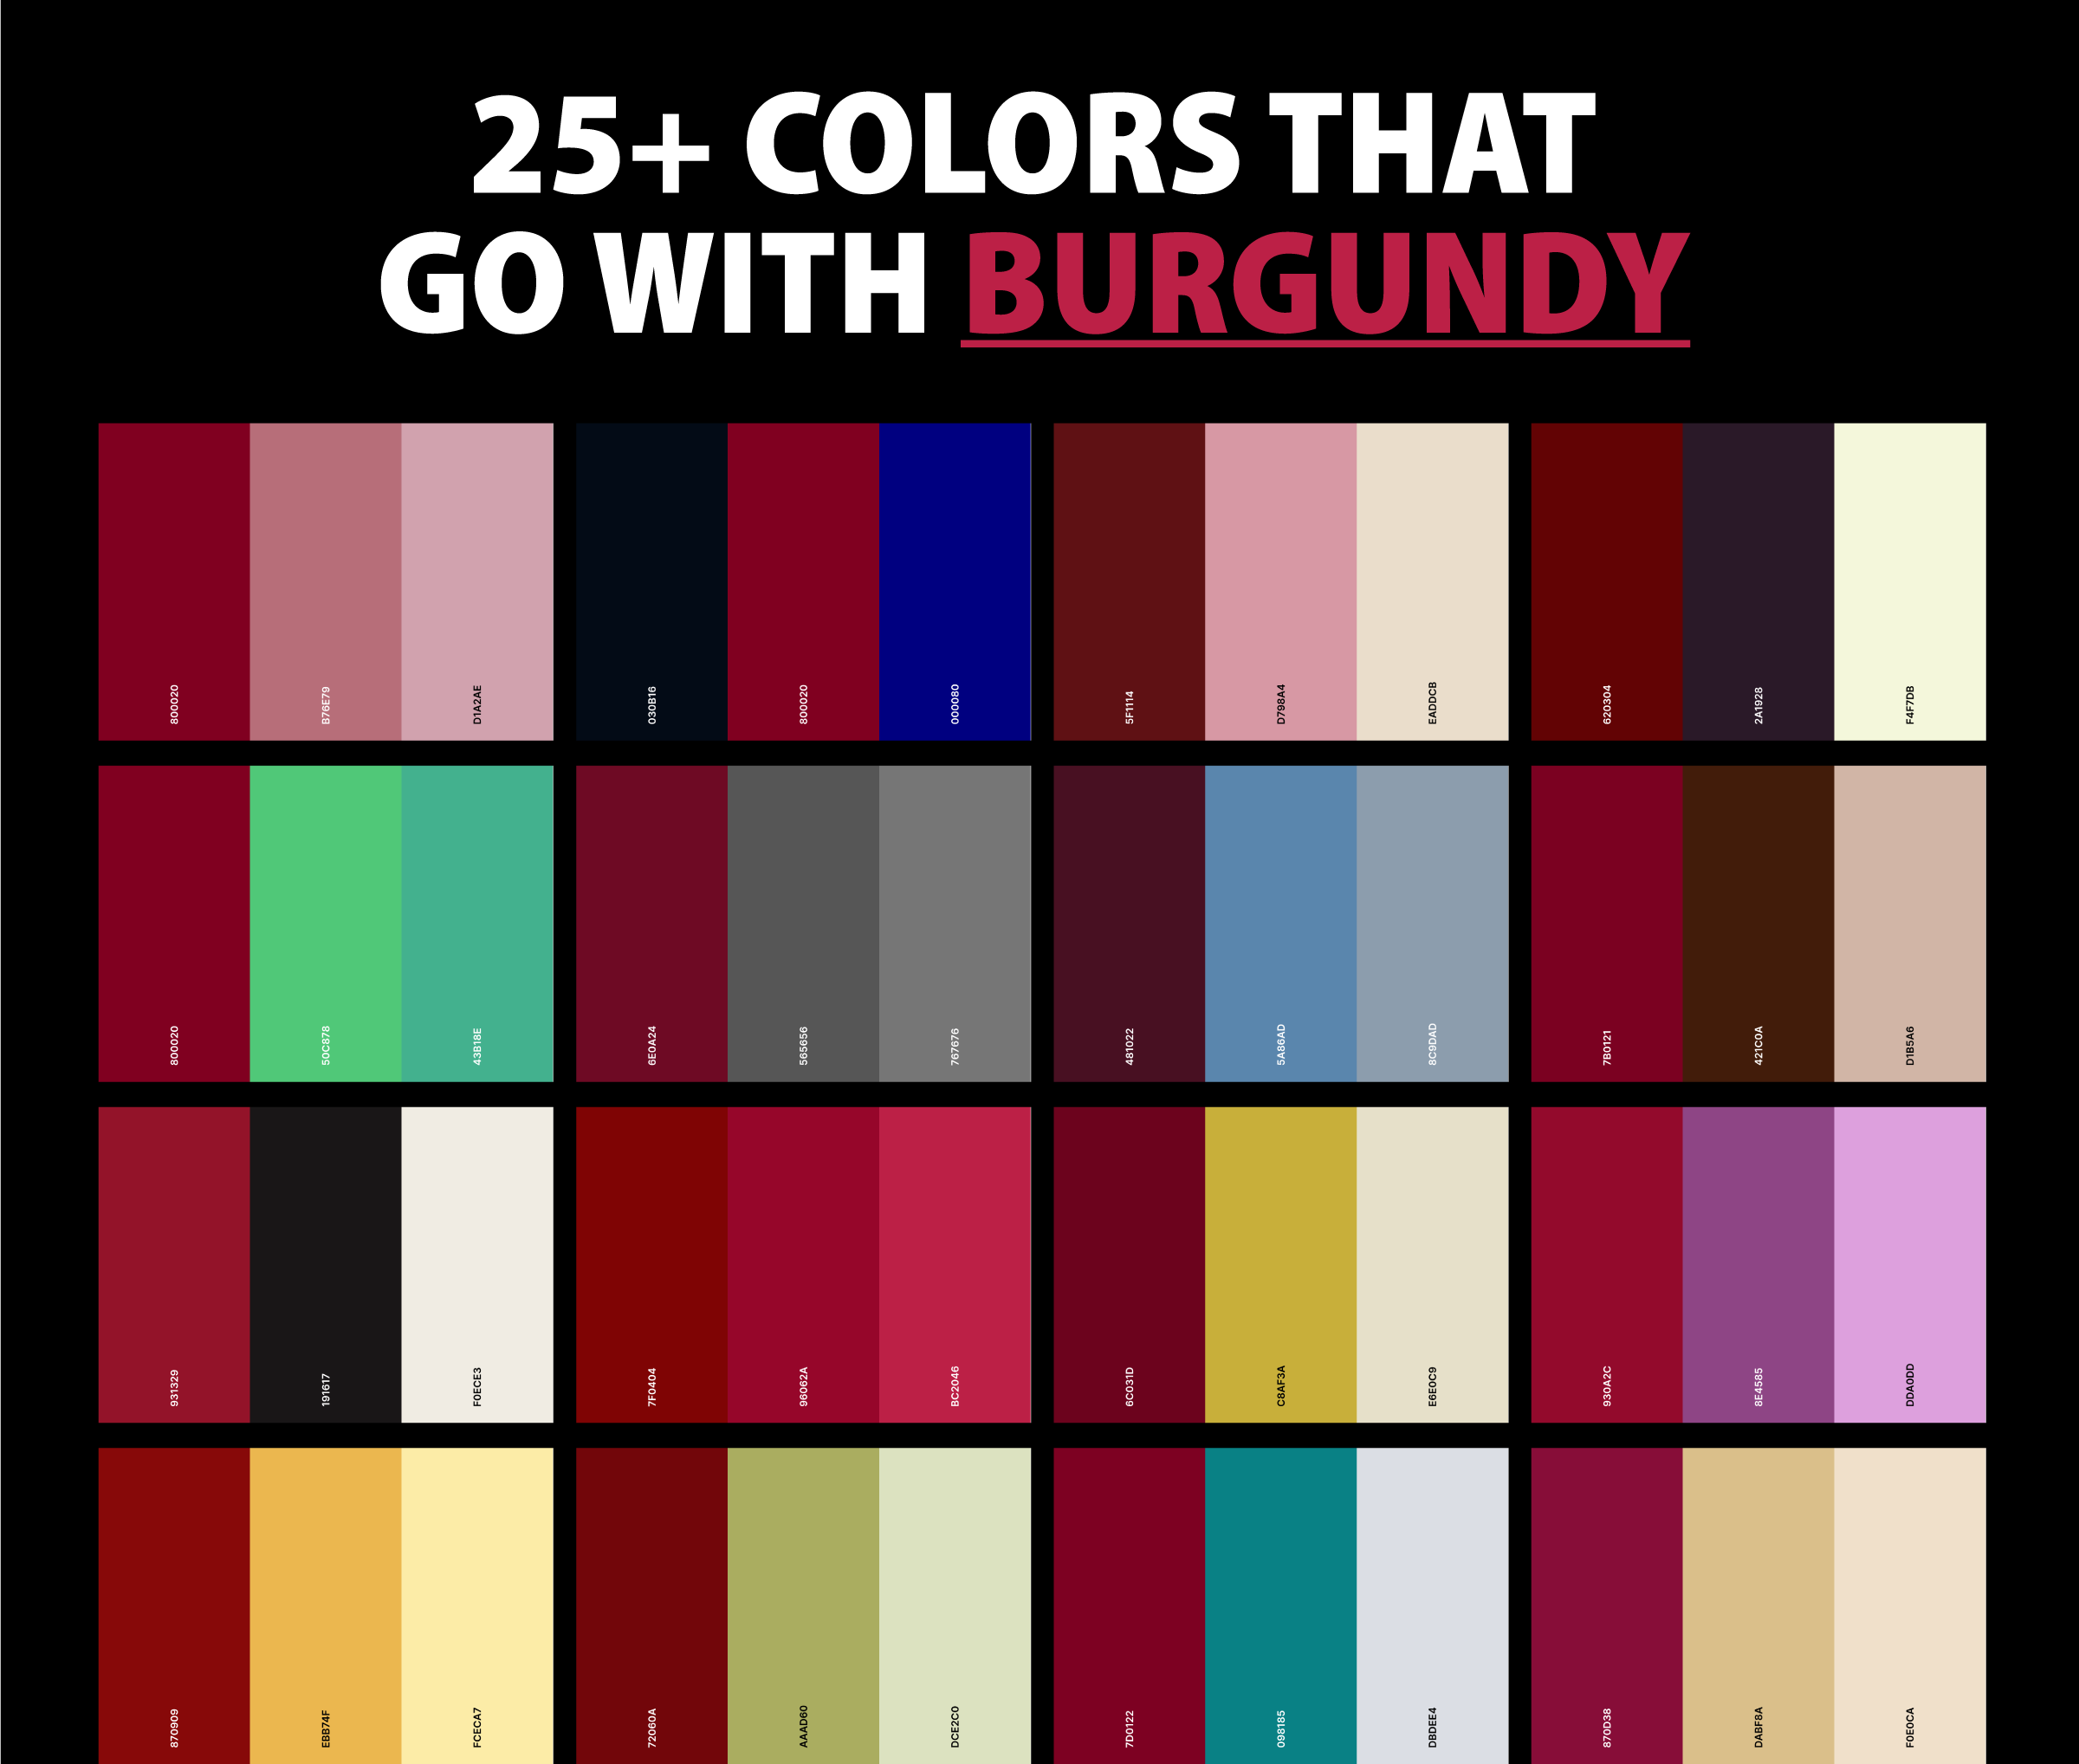 What Colors Go With Burgundy? Try These 12 Color Combos